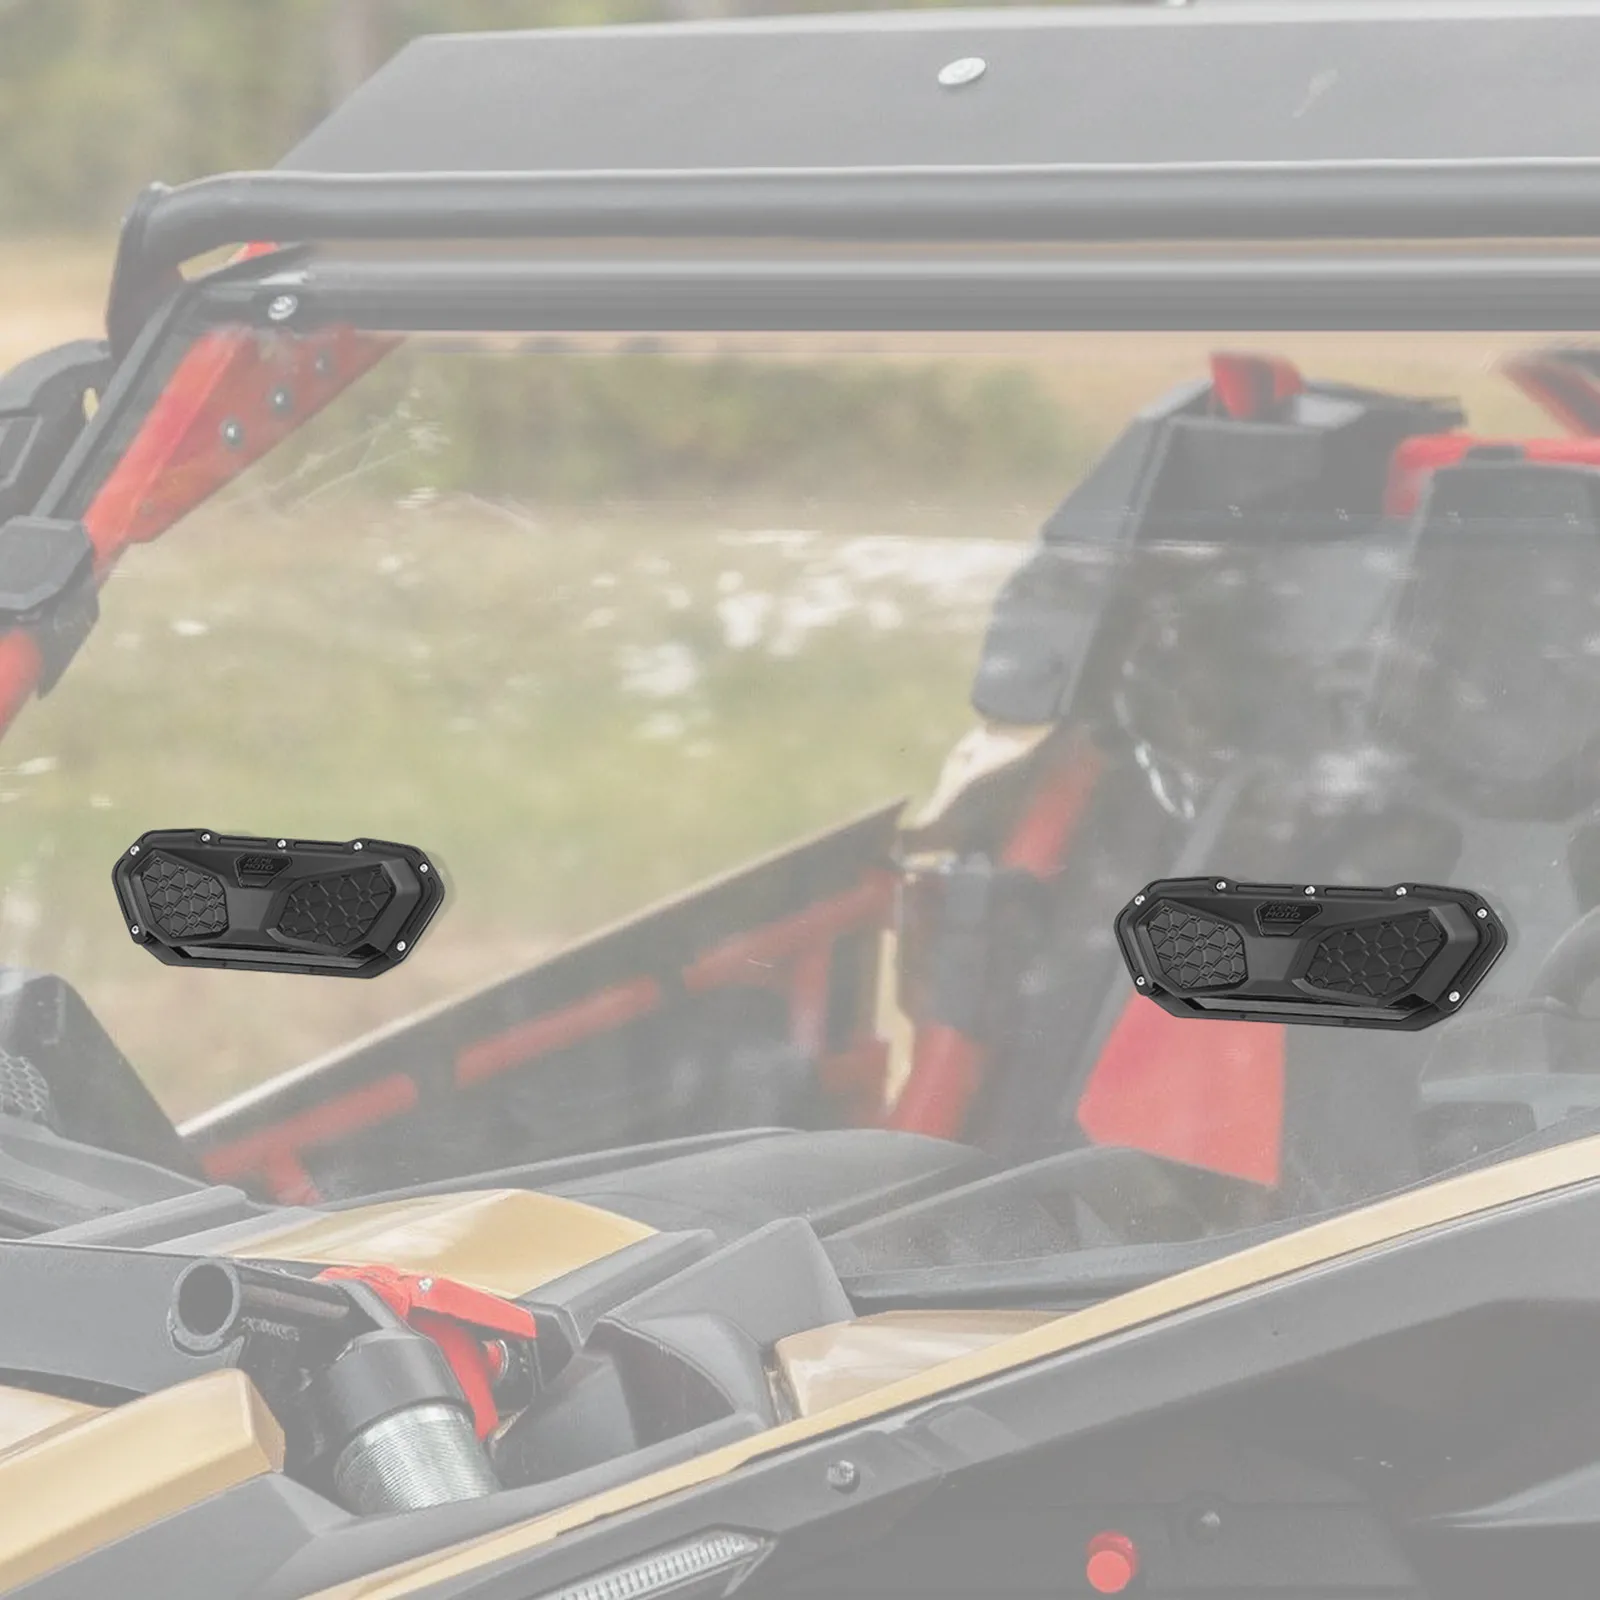 self install utv windshield vent kit includes 2 vents for hard coated polycarbonate windshields UTV Windshield Roof Vent for Can-am Maverick X3 Compatible with Polaris RZR for Kawasaki Teryx Install Kit Defrost Defog